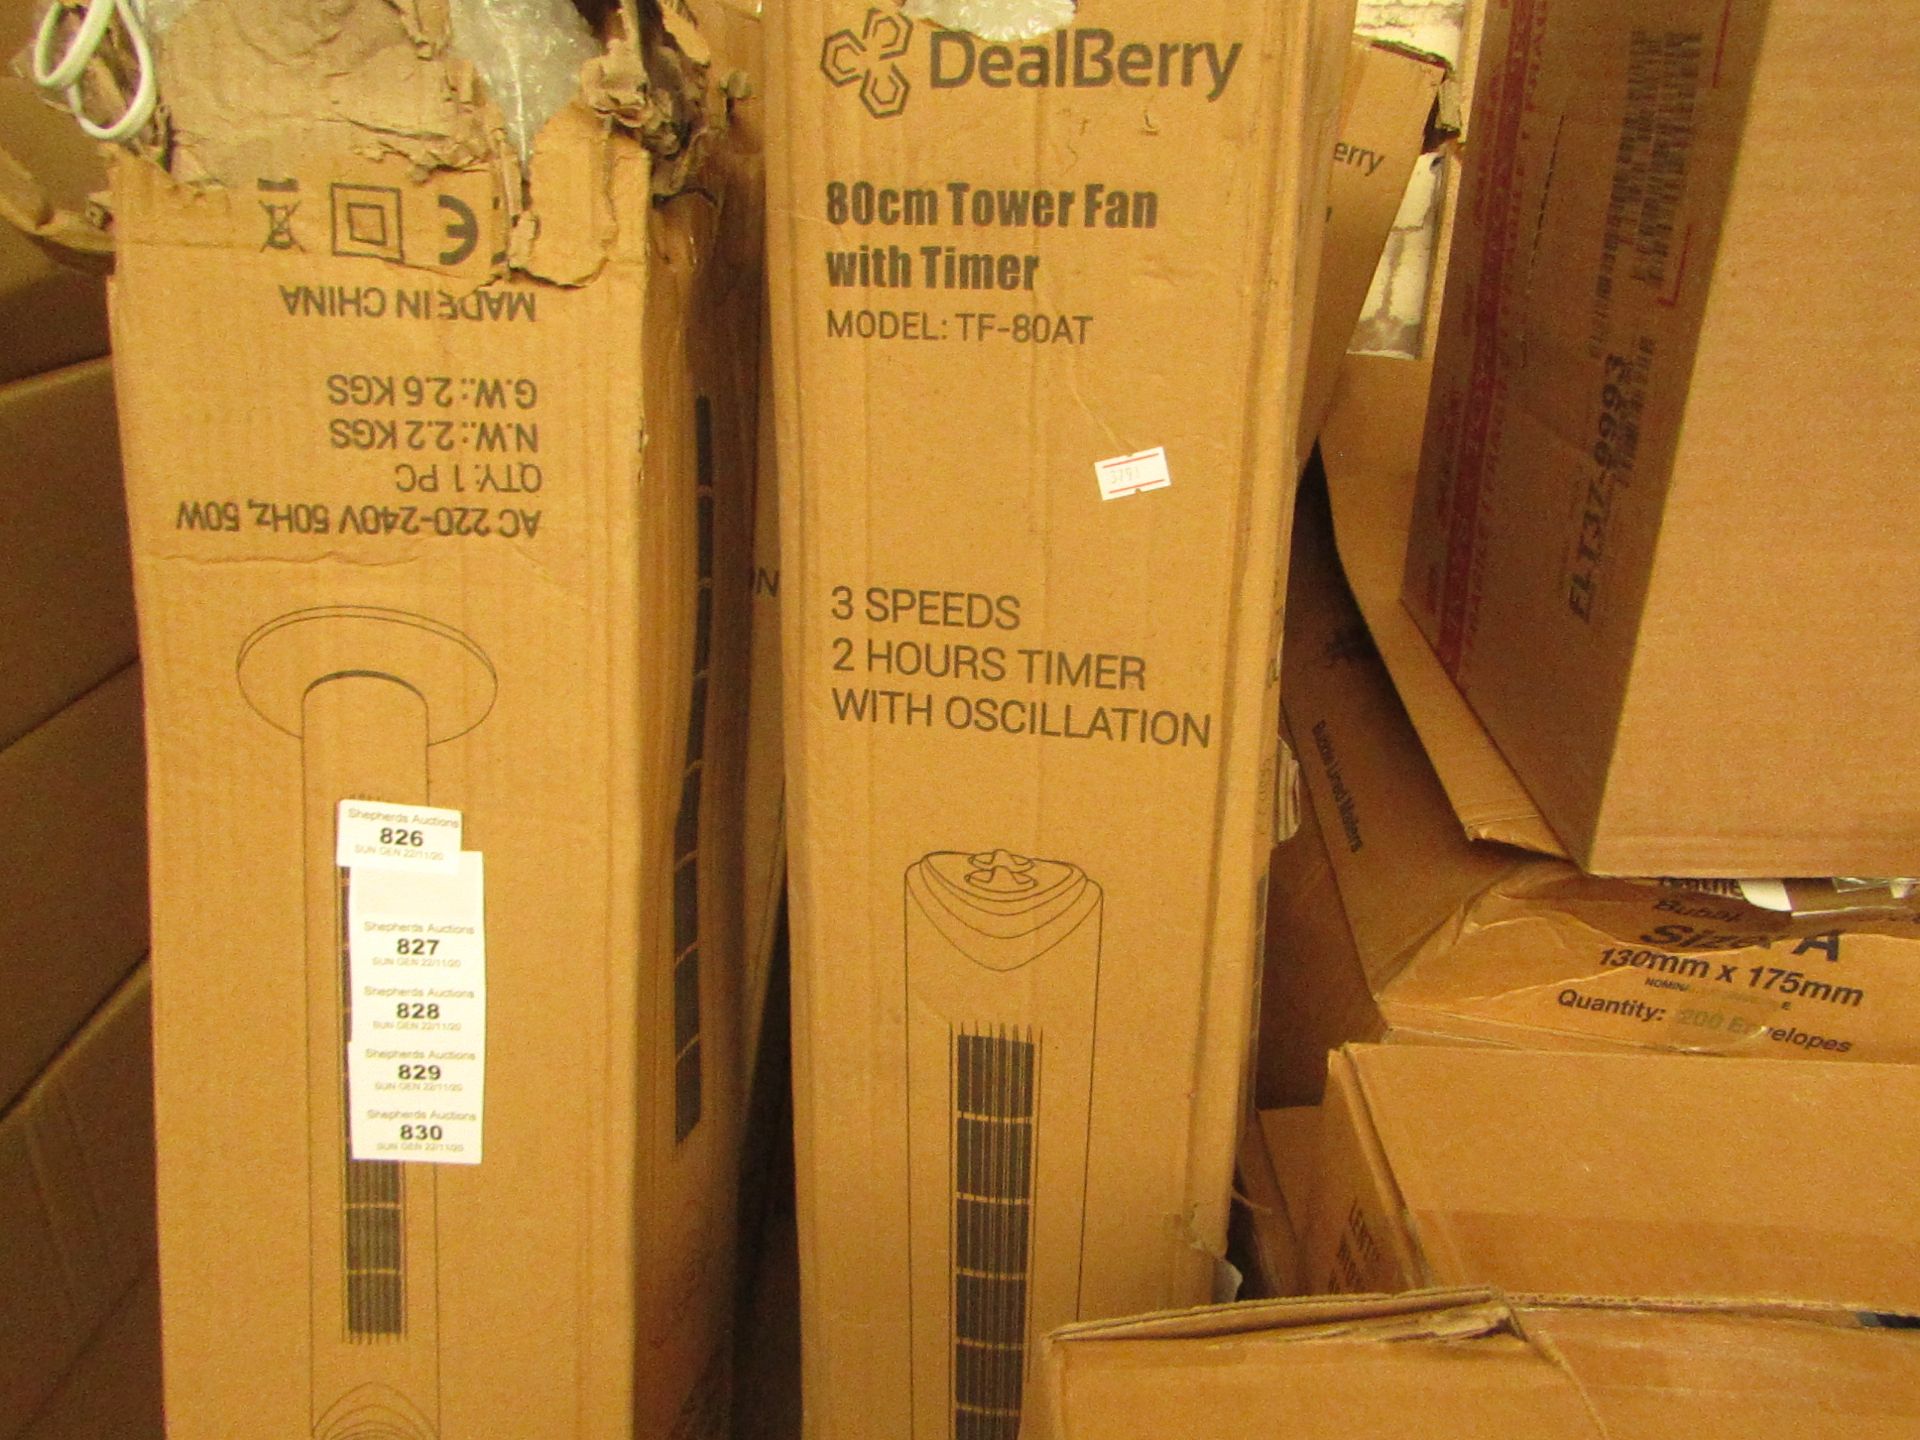 Dealberry 80cm Tower Fan with Timer. Model TF-80AT. Boxed but untested.